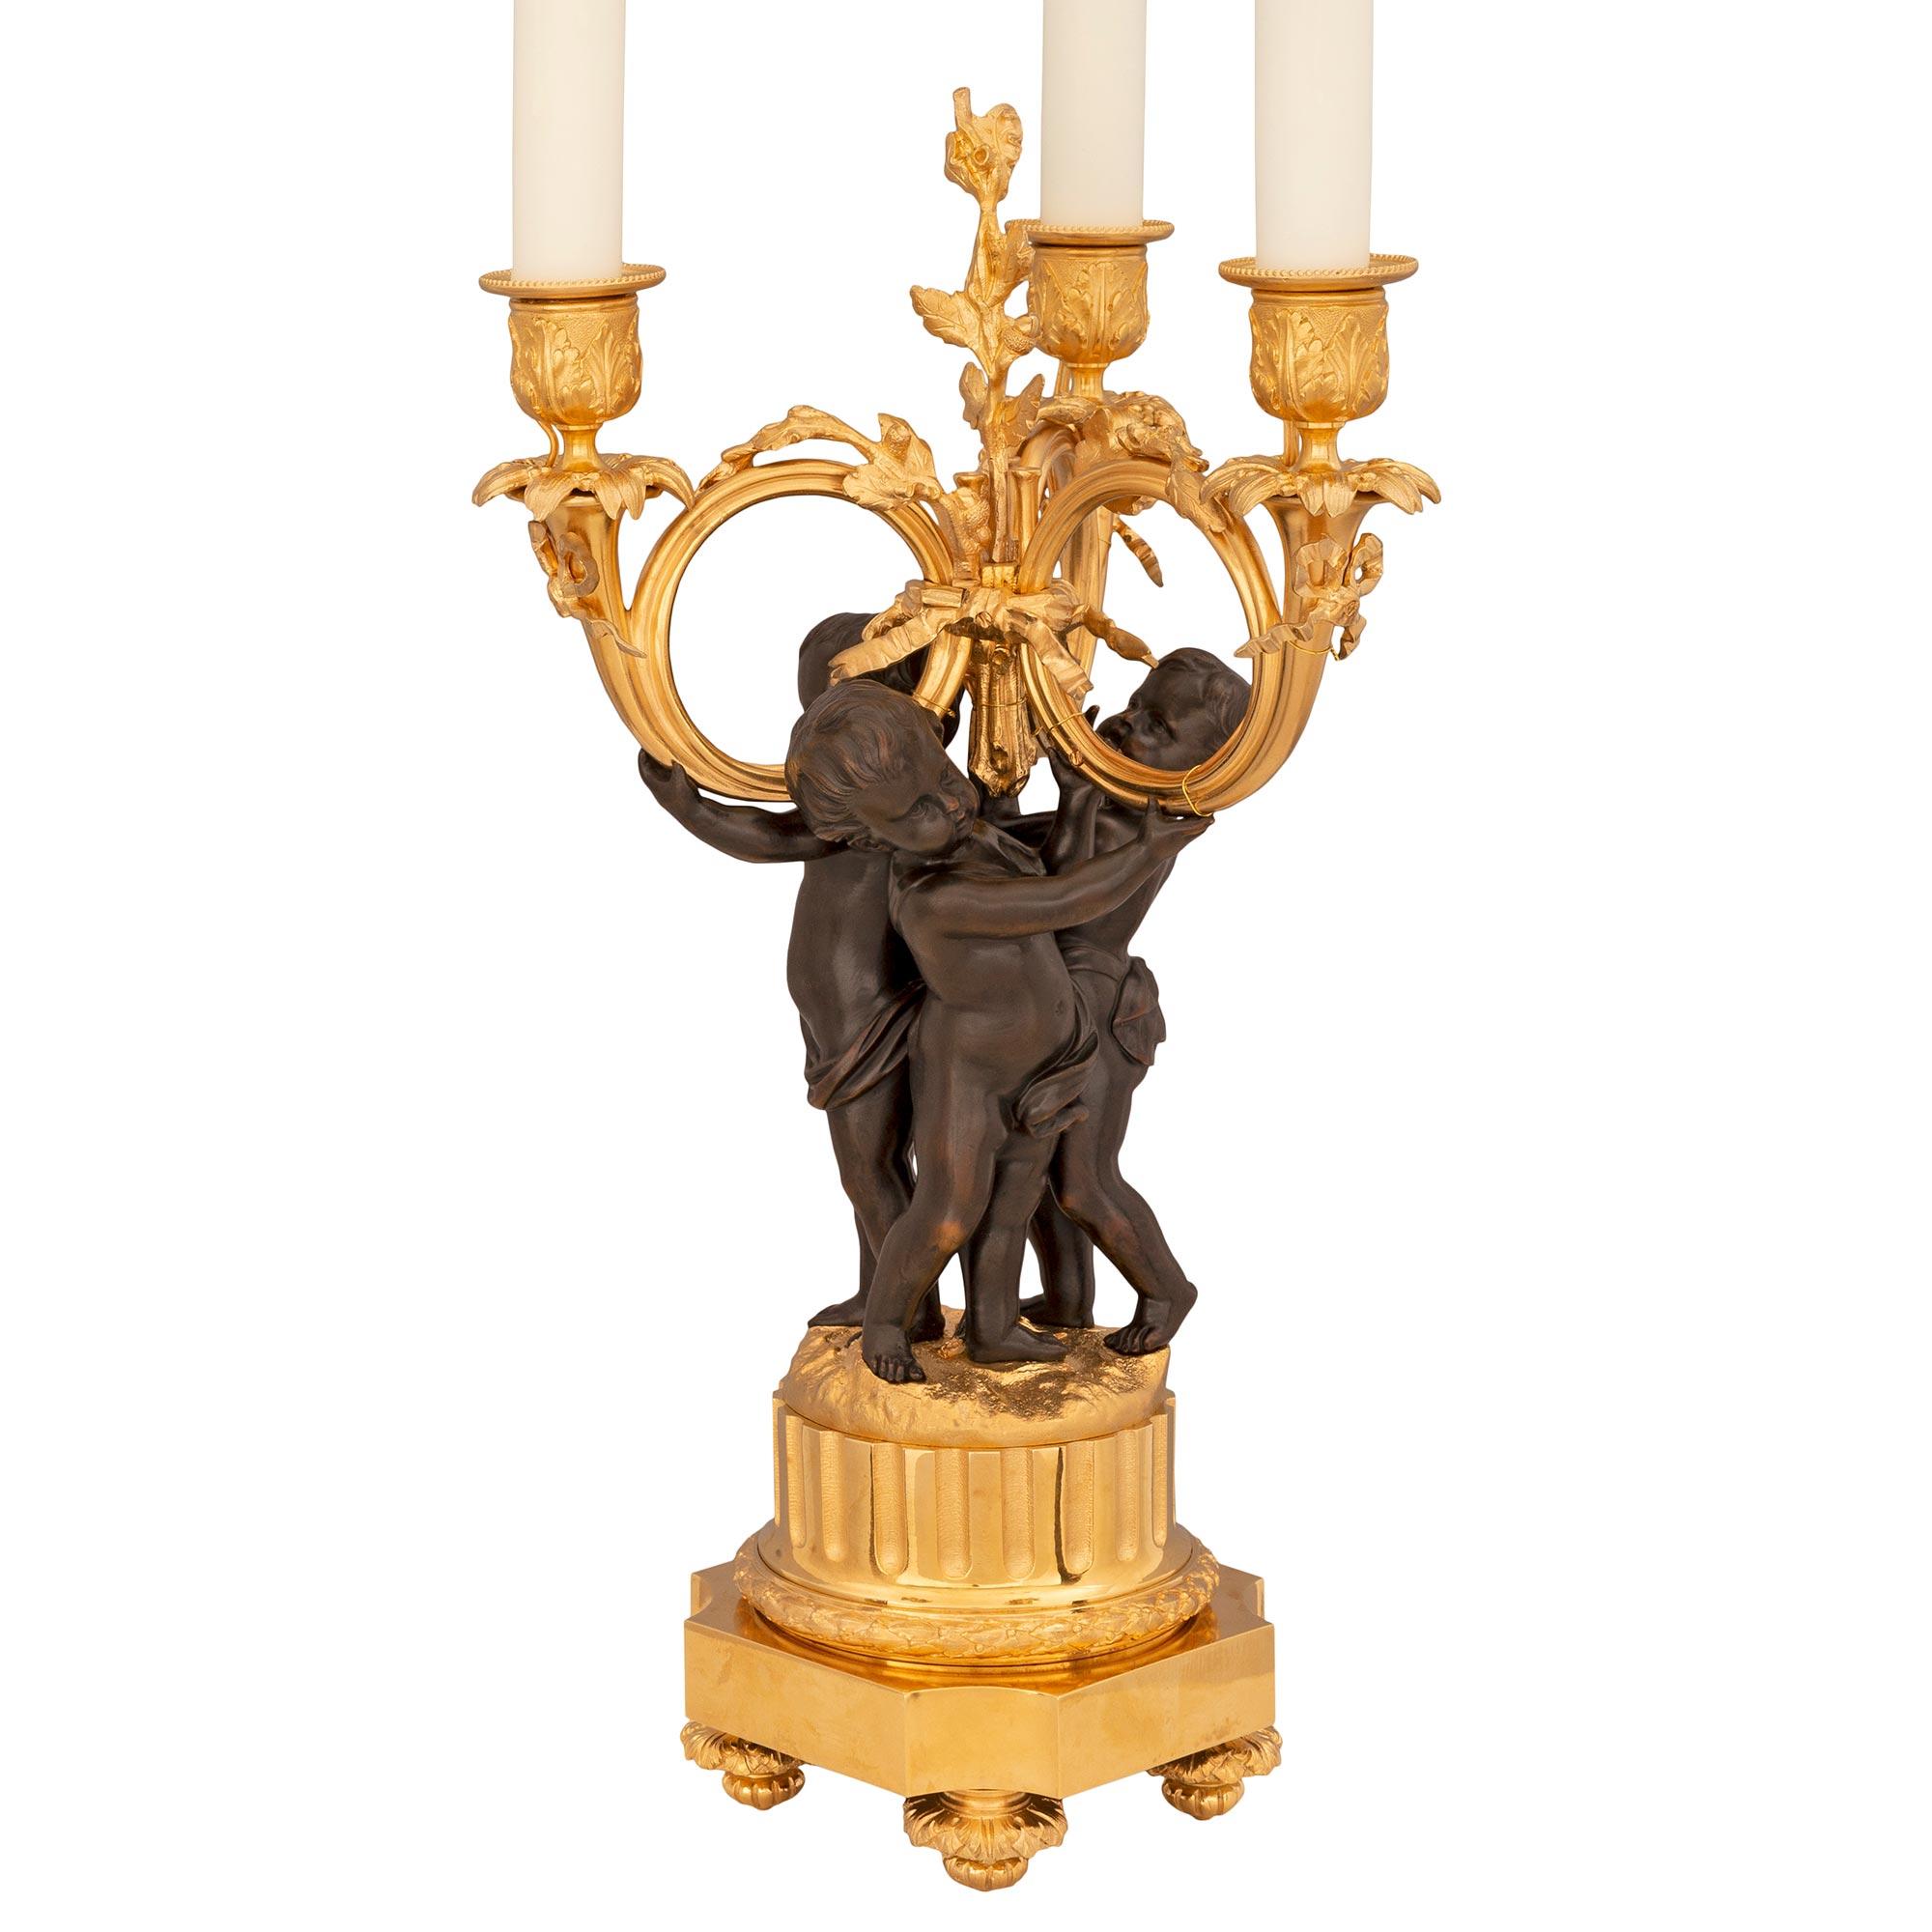 A striking and very high quality pair of French 19th century Louis XVI st. Belle Époque period patinated bronze and ormolu lamps. Each three arm lamp is raised by elegant foliate topie shaped feet below the square base with concave corners and